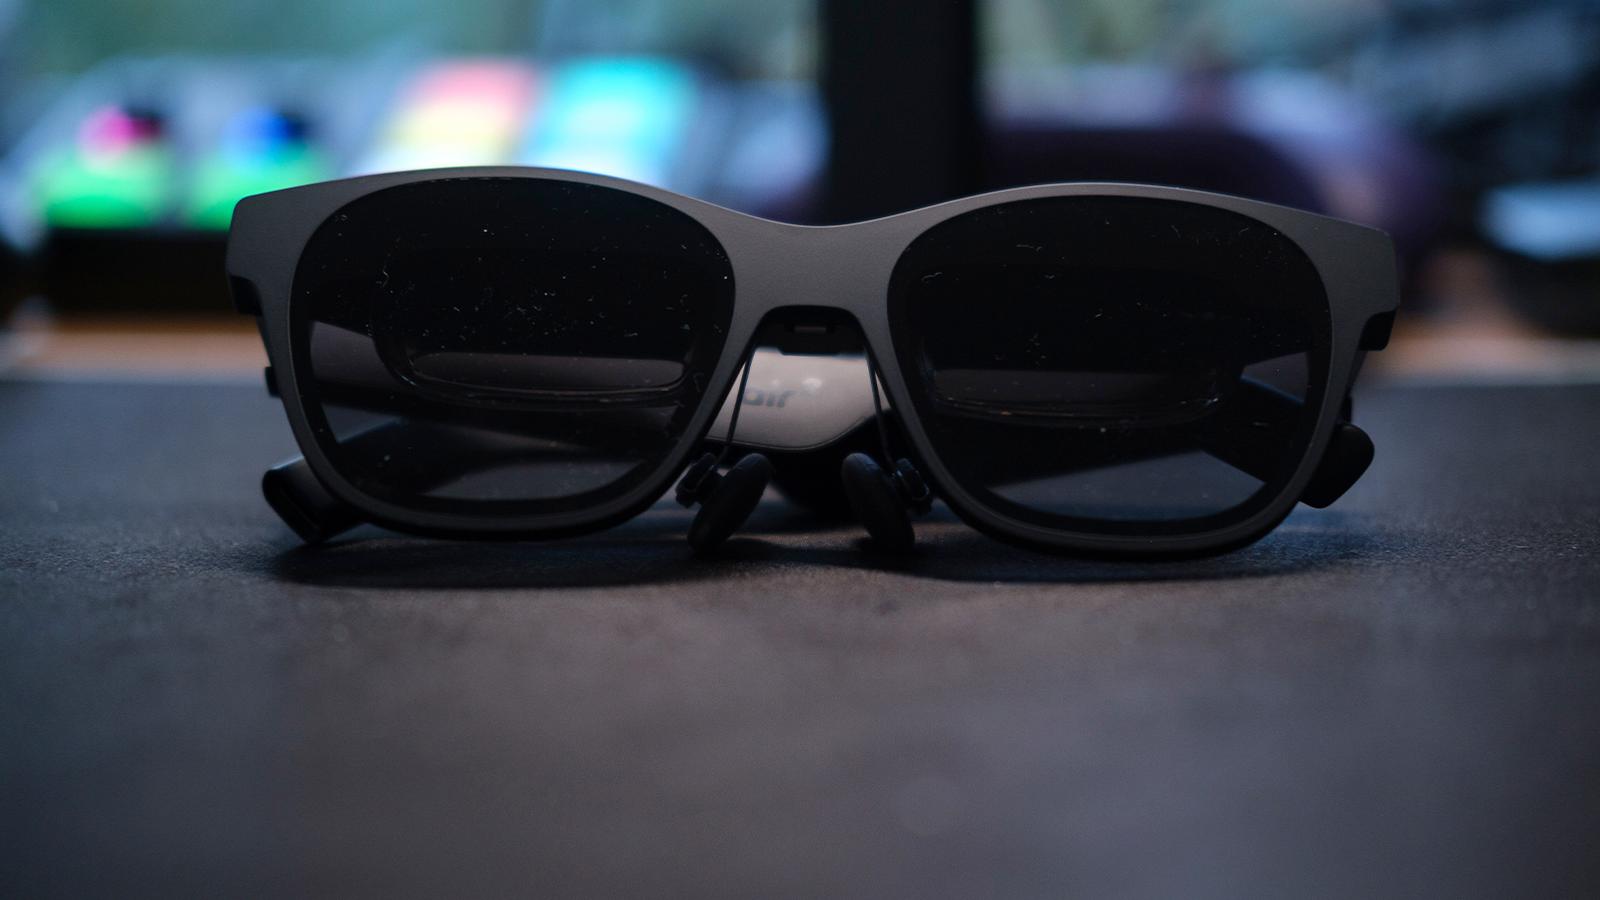 Xreal Air 2 vs. Xreal Air 2 Pro: Which Smart Glasses Win?